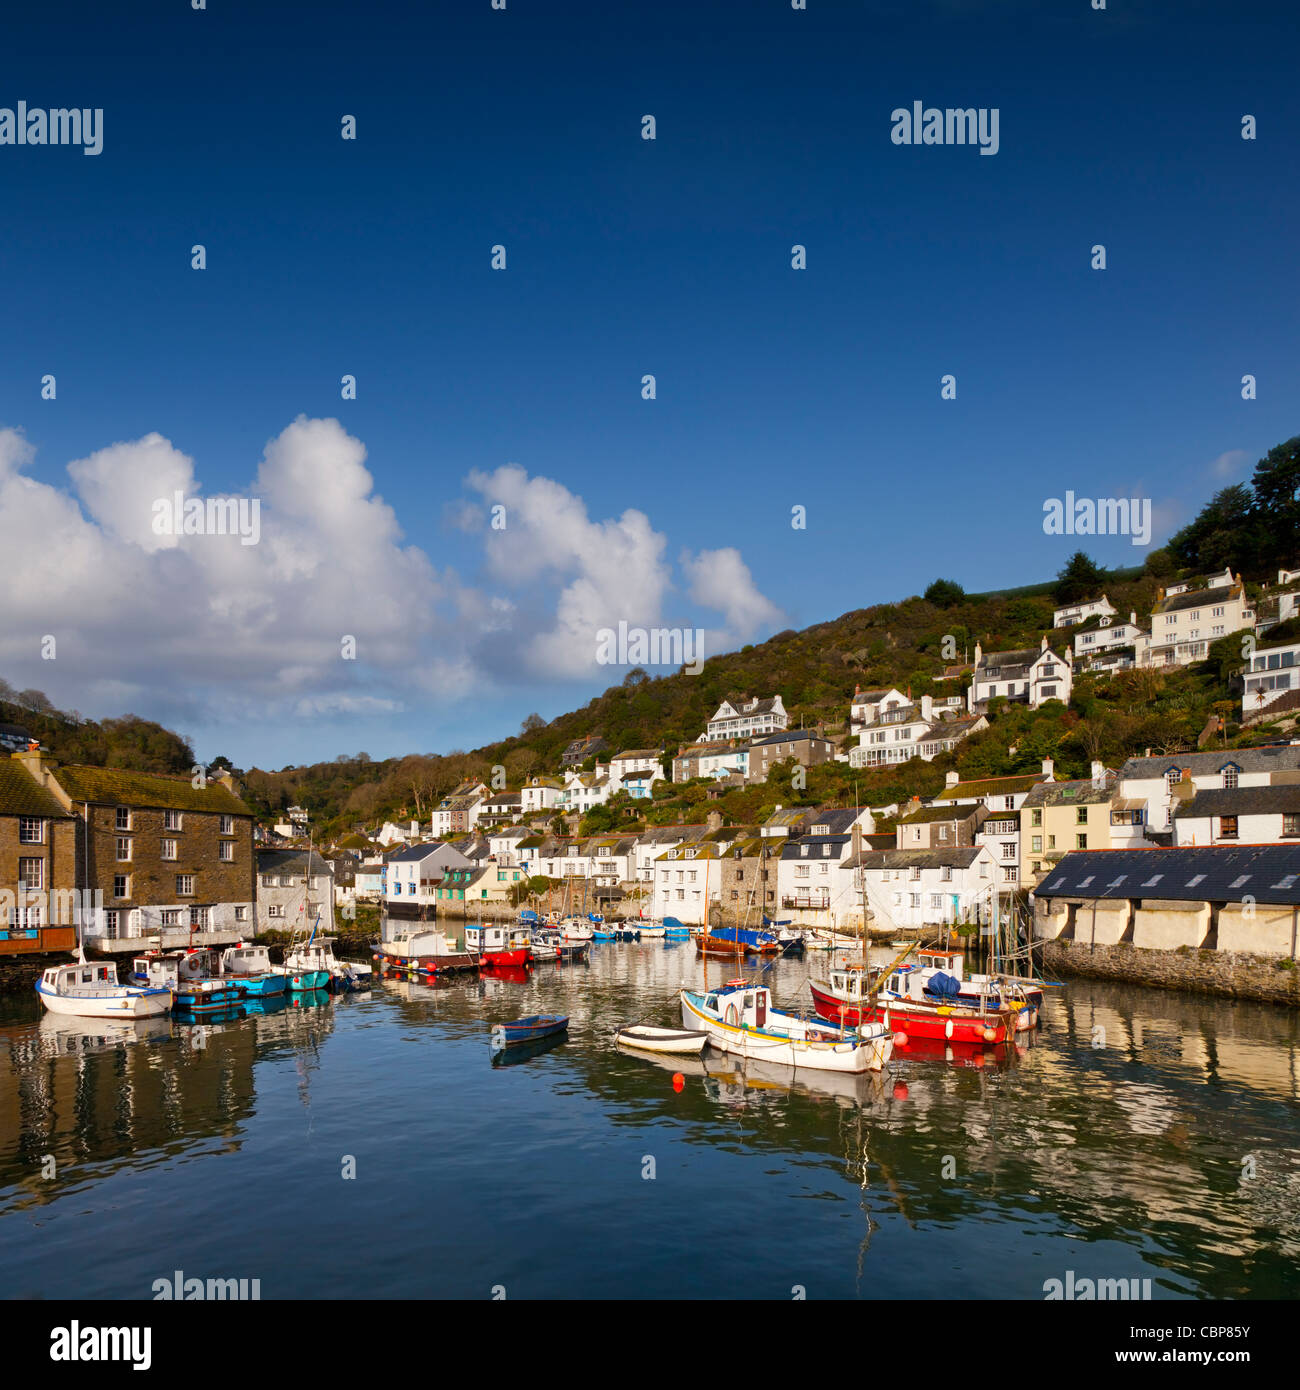 The fishing village of Polperro, Cornwall, England, on a fine October day. Stock Photo